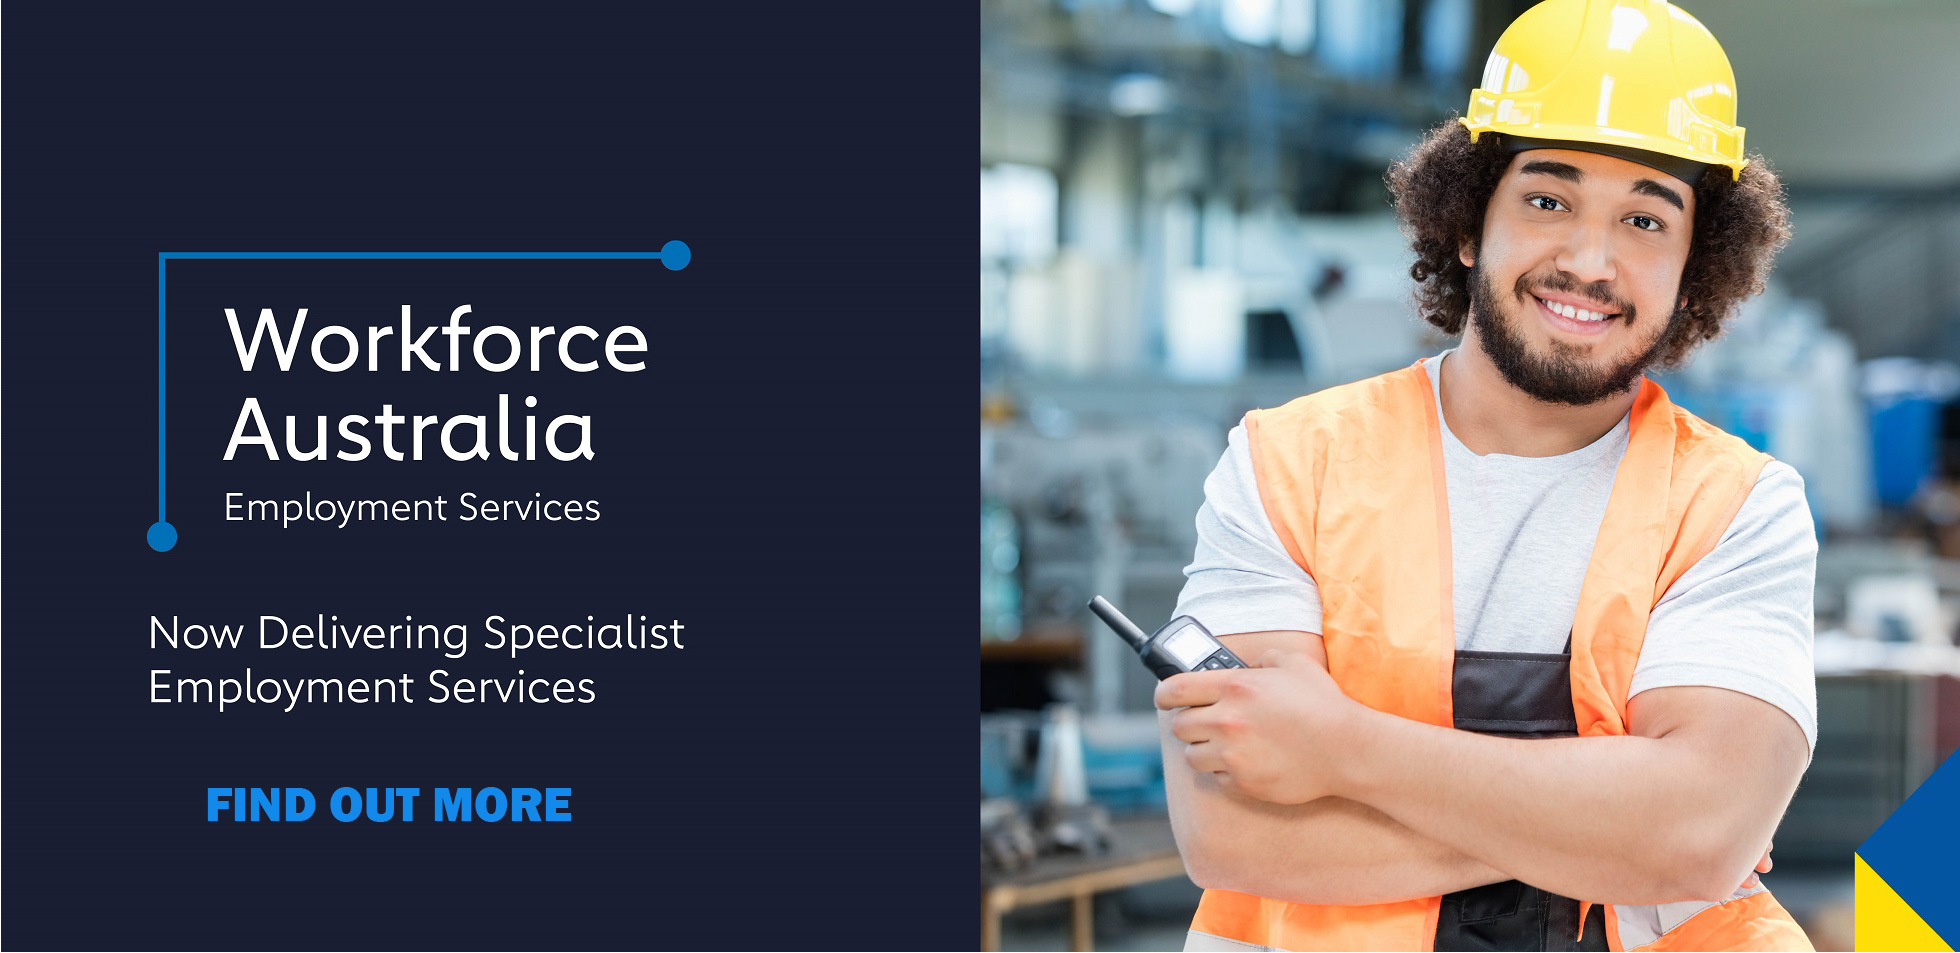 Tradie smiling next to text: Workforce Australia Employment Services. Find out more.